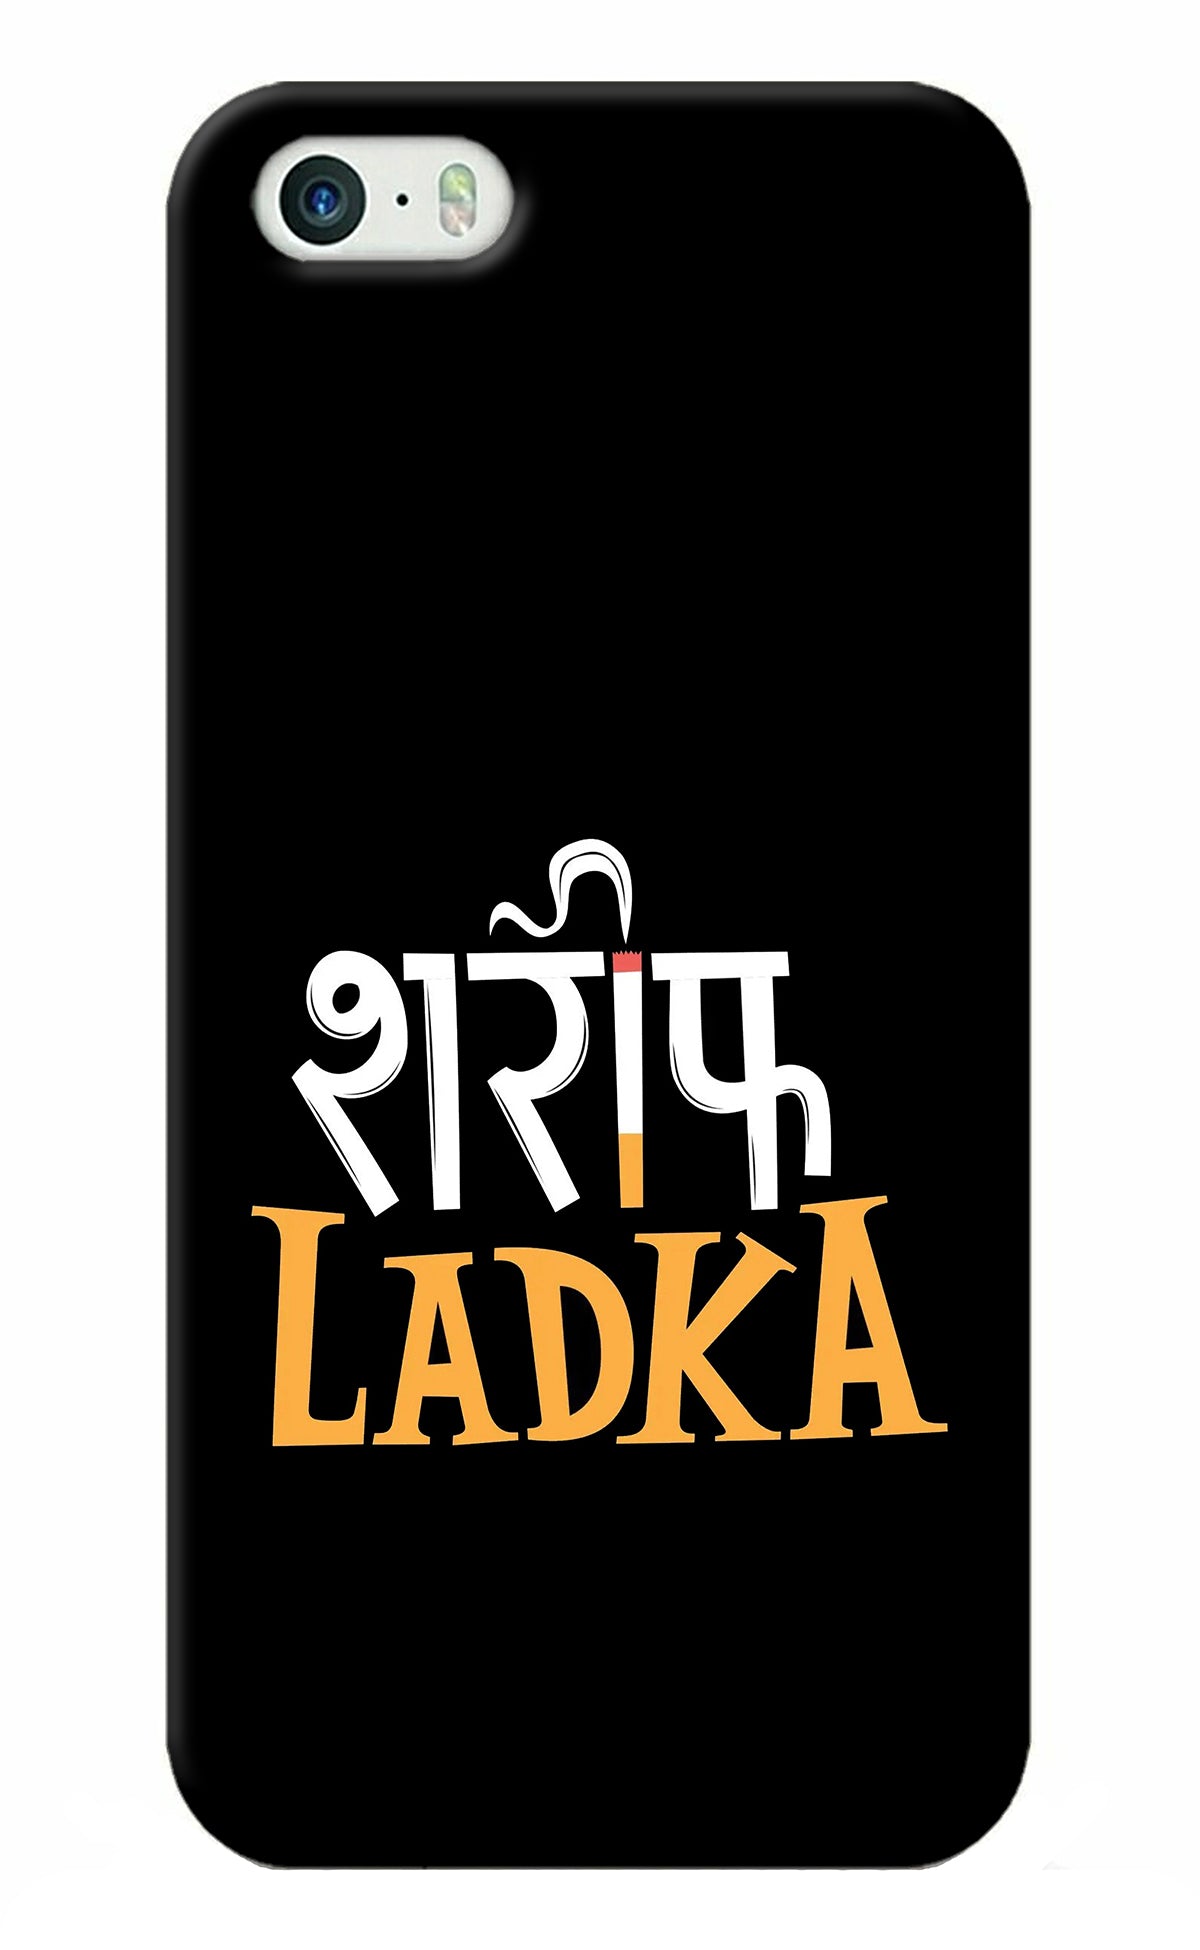 Shareef Ladka iPhone 5/5s Back Cover